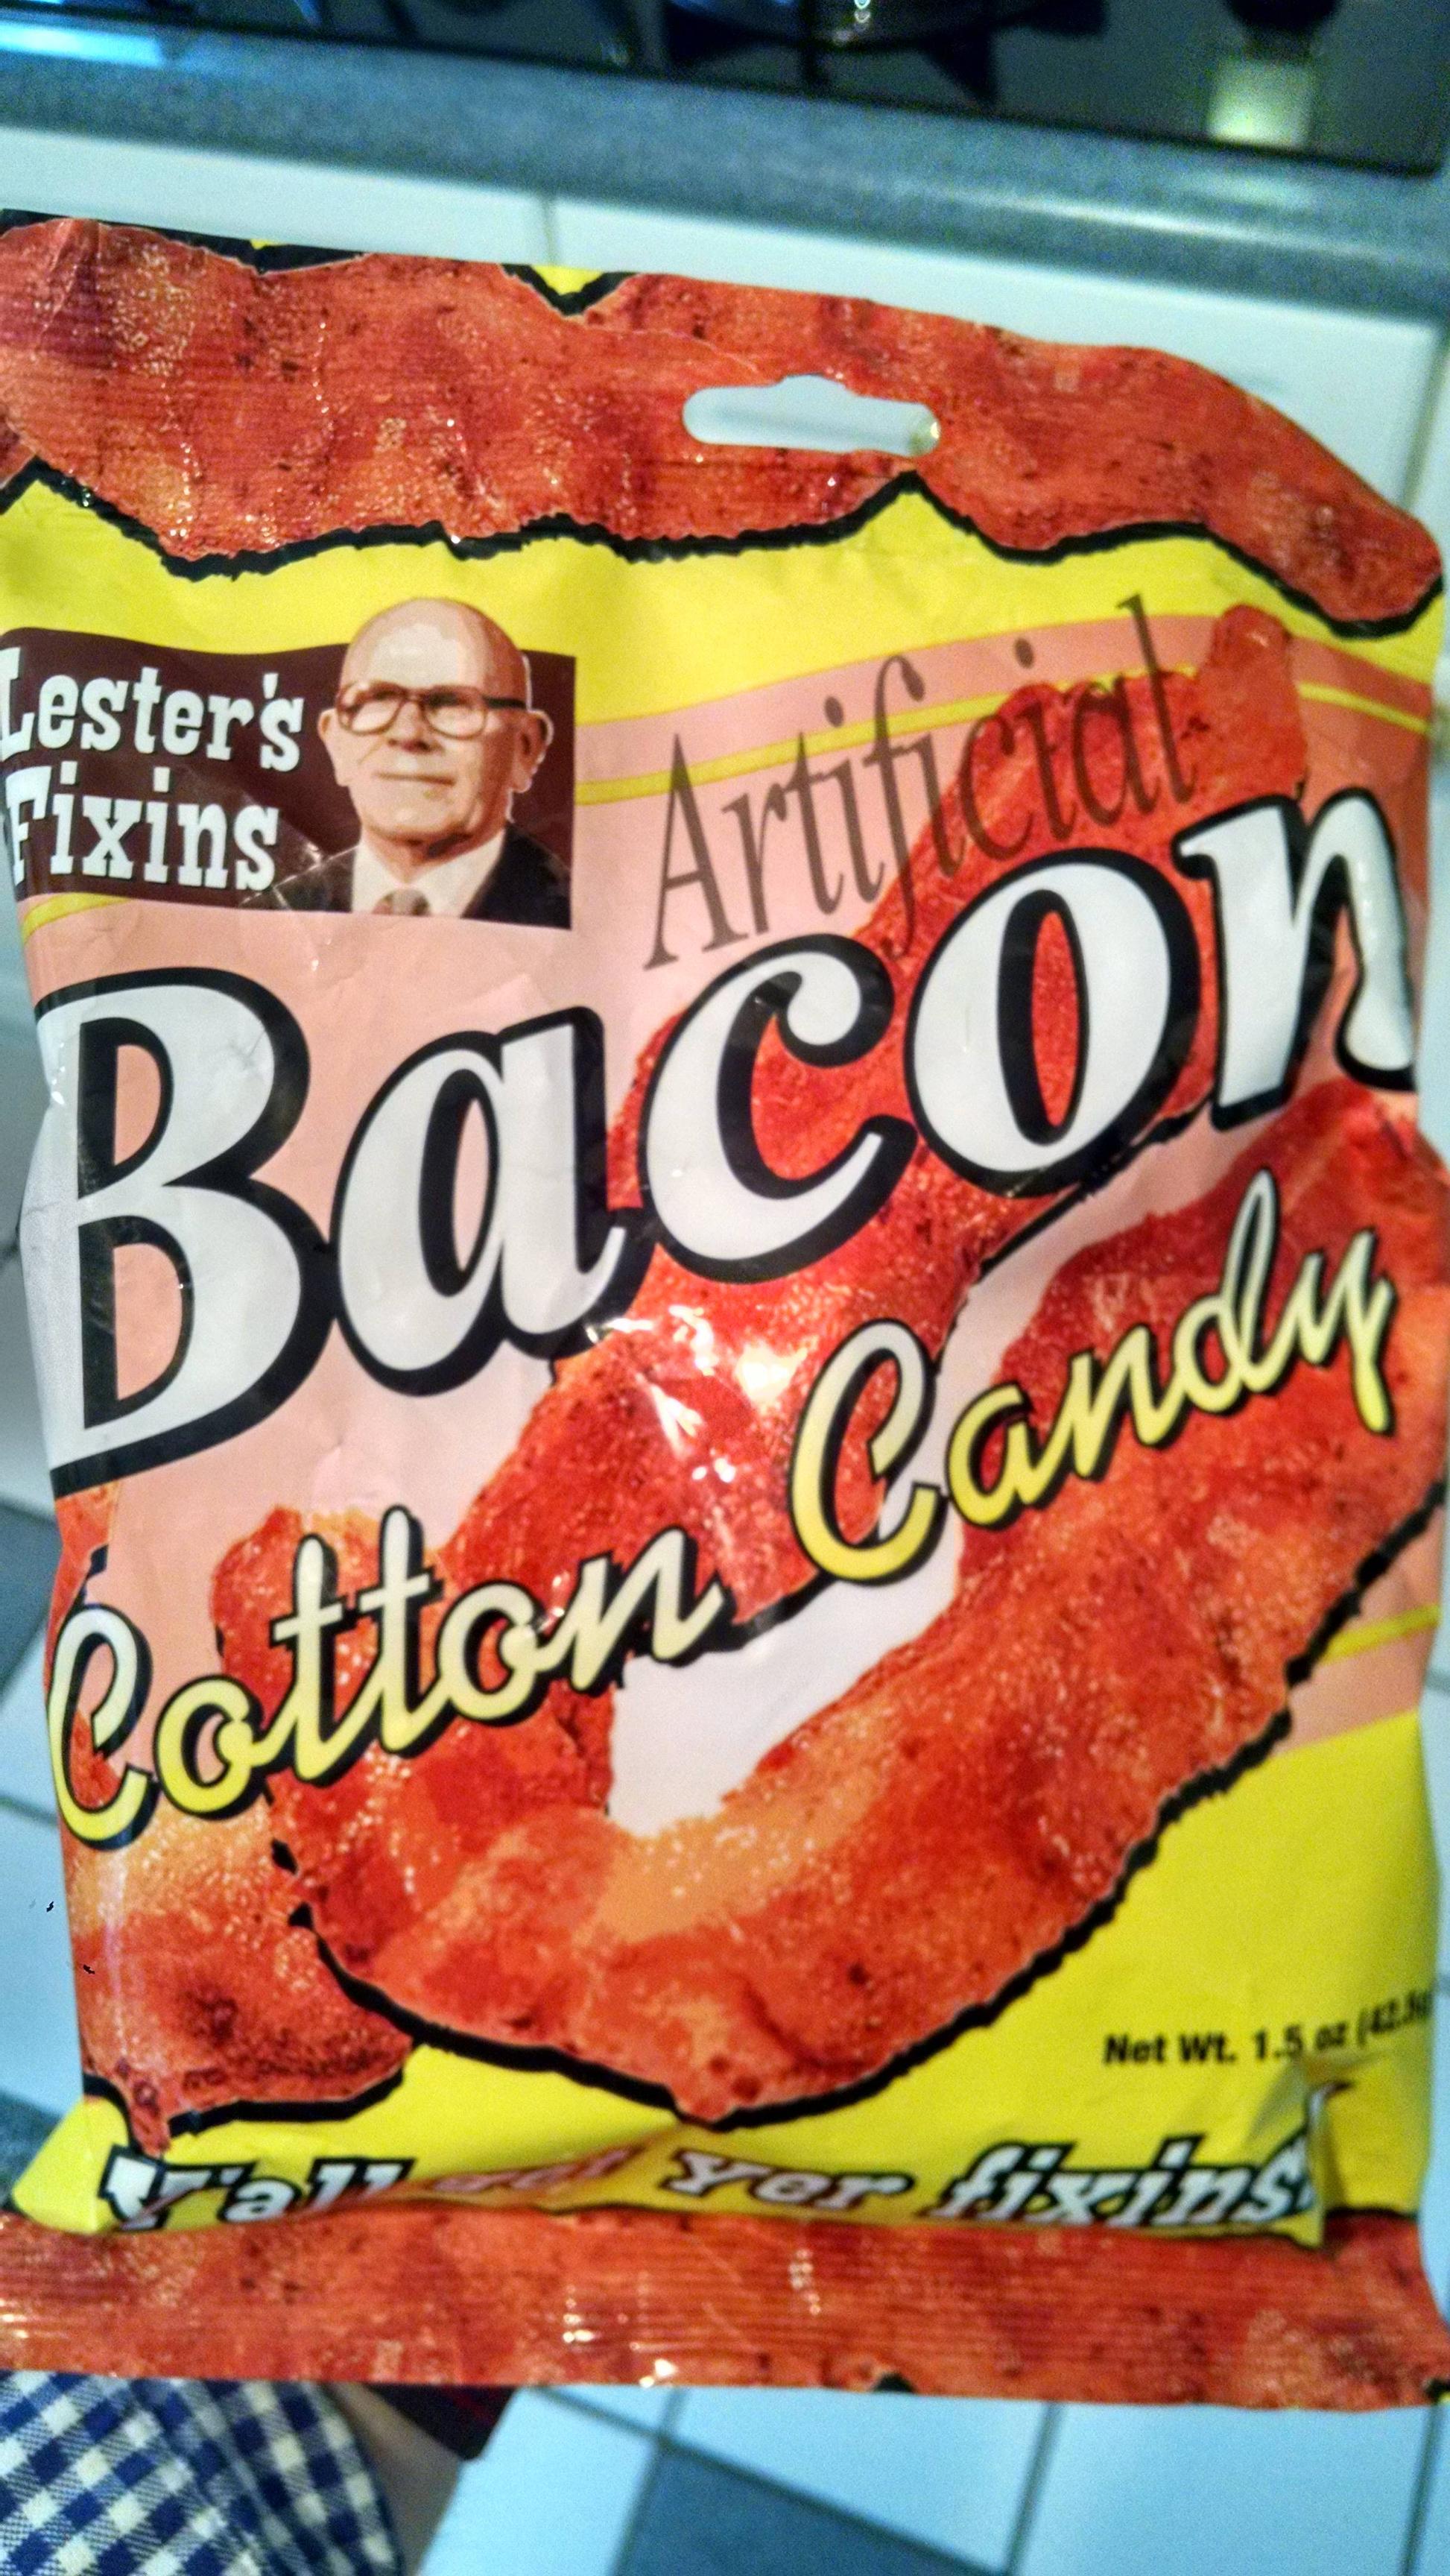 Bacon cotton candy exists.